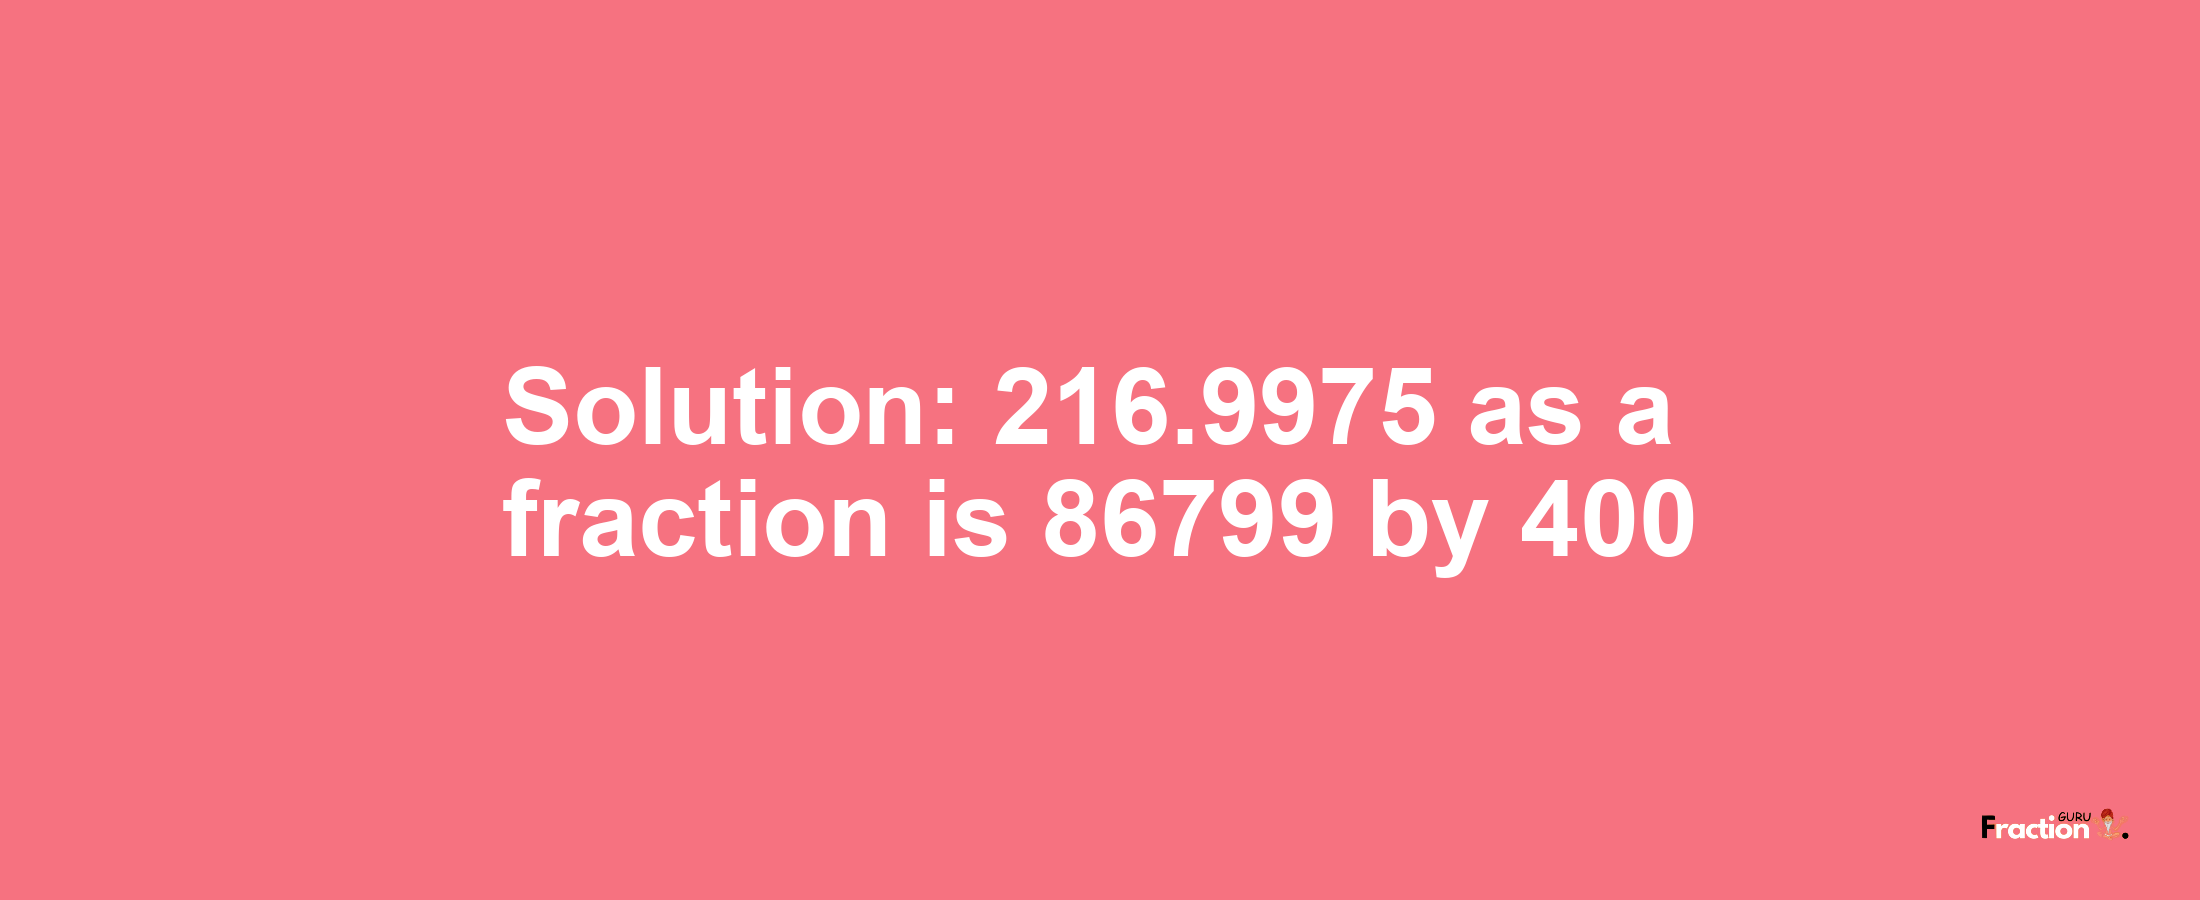 Solution:216.9975 as a fraction is 86799/400